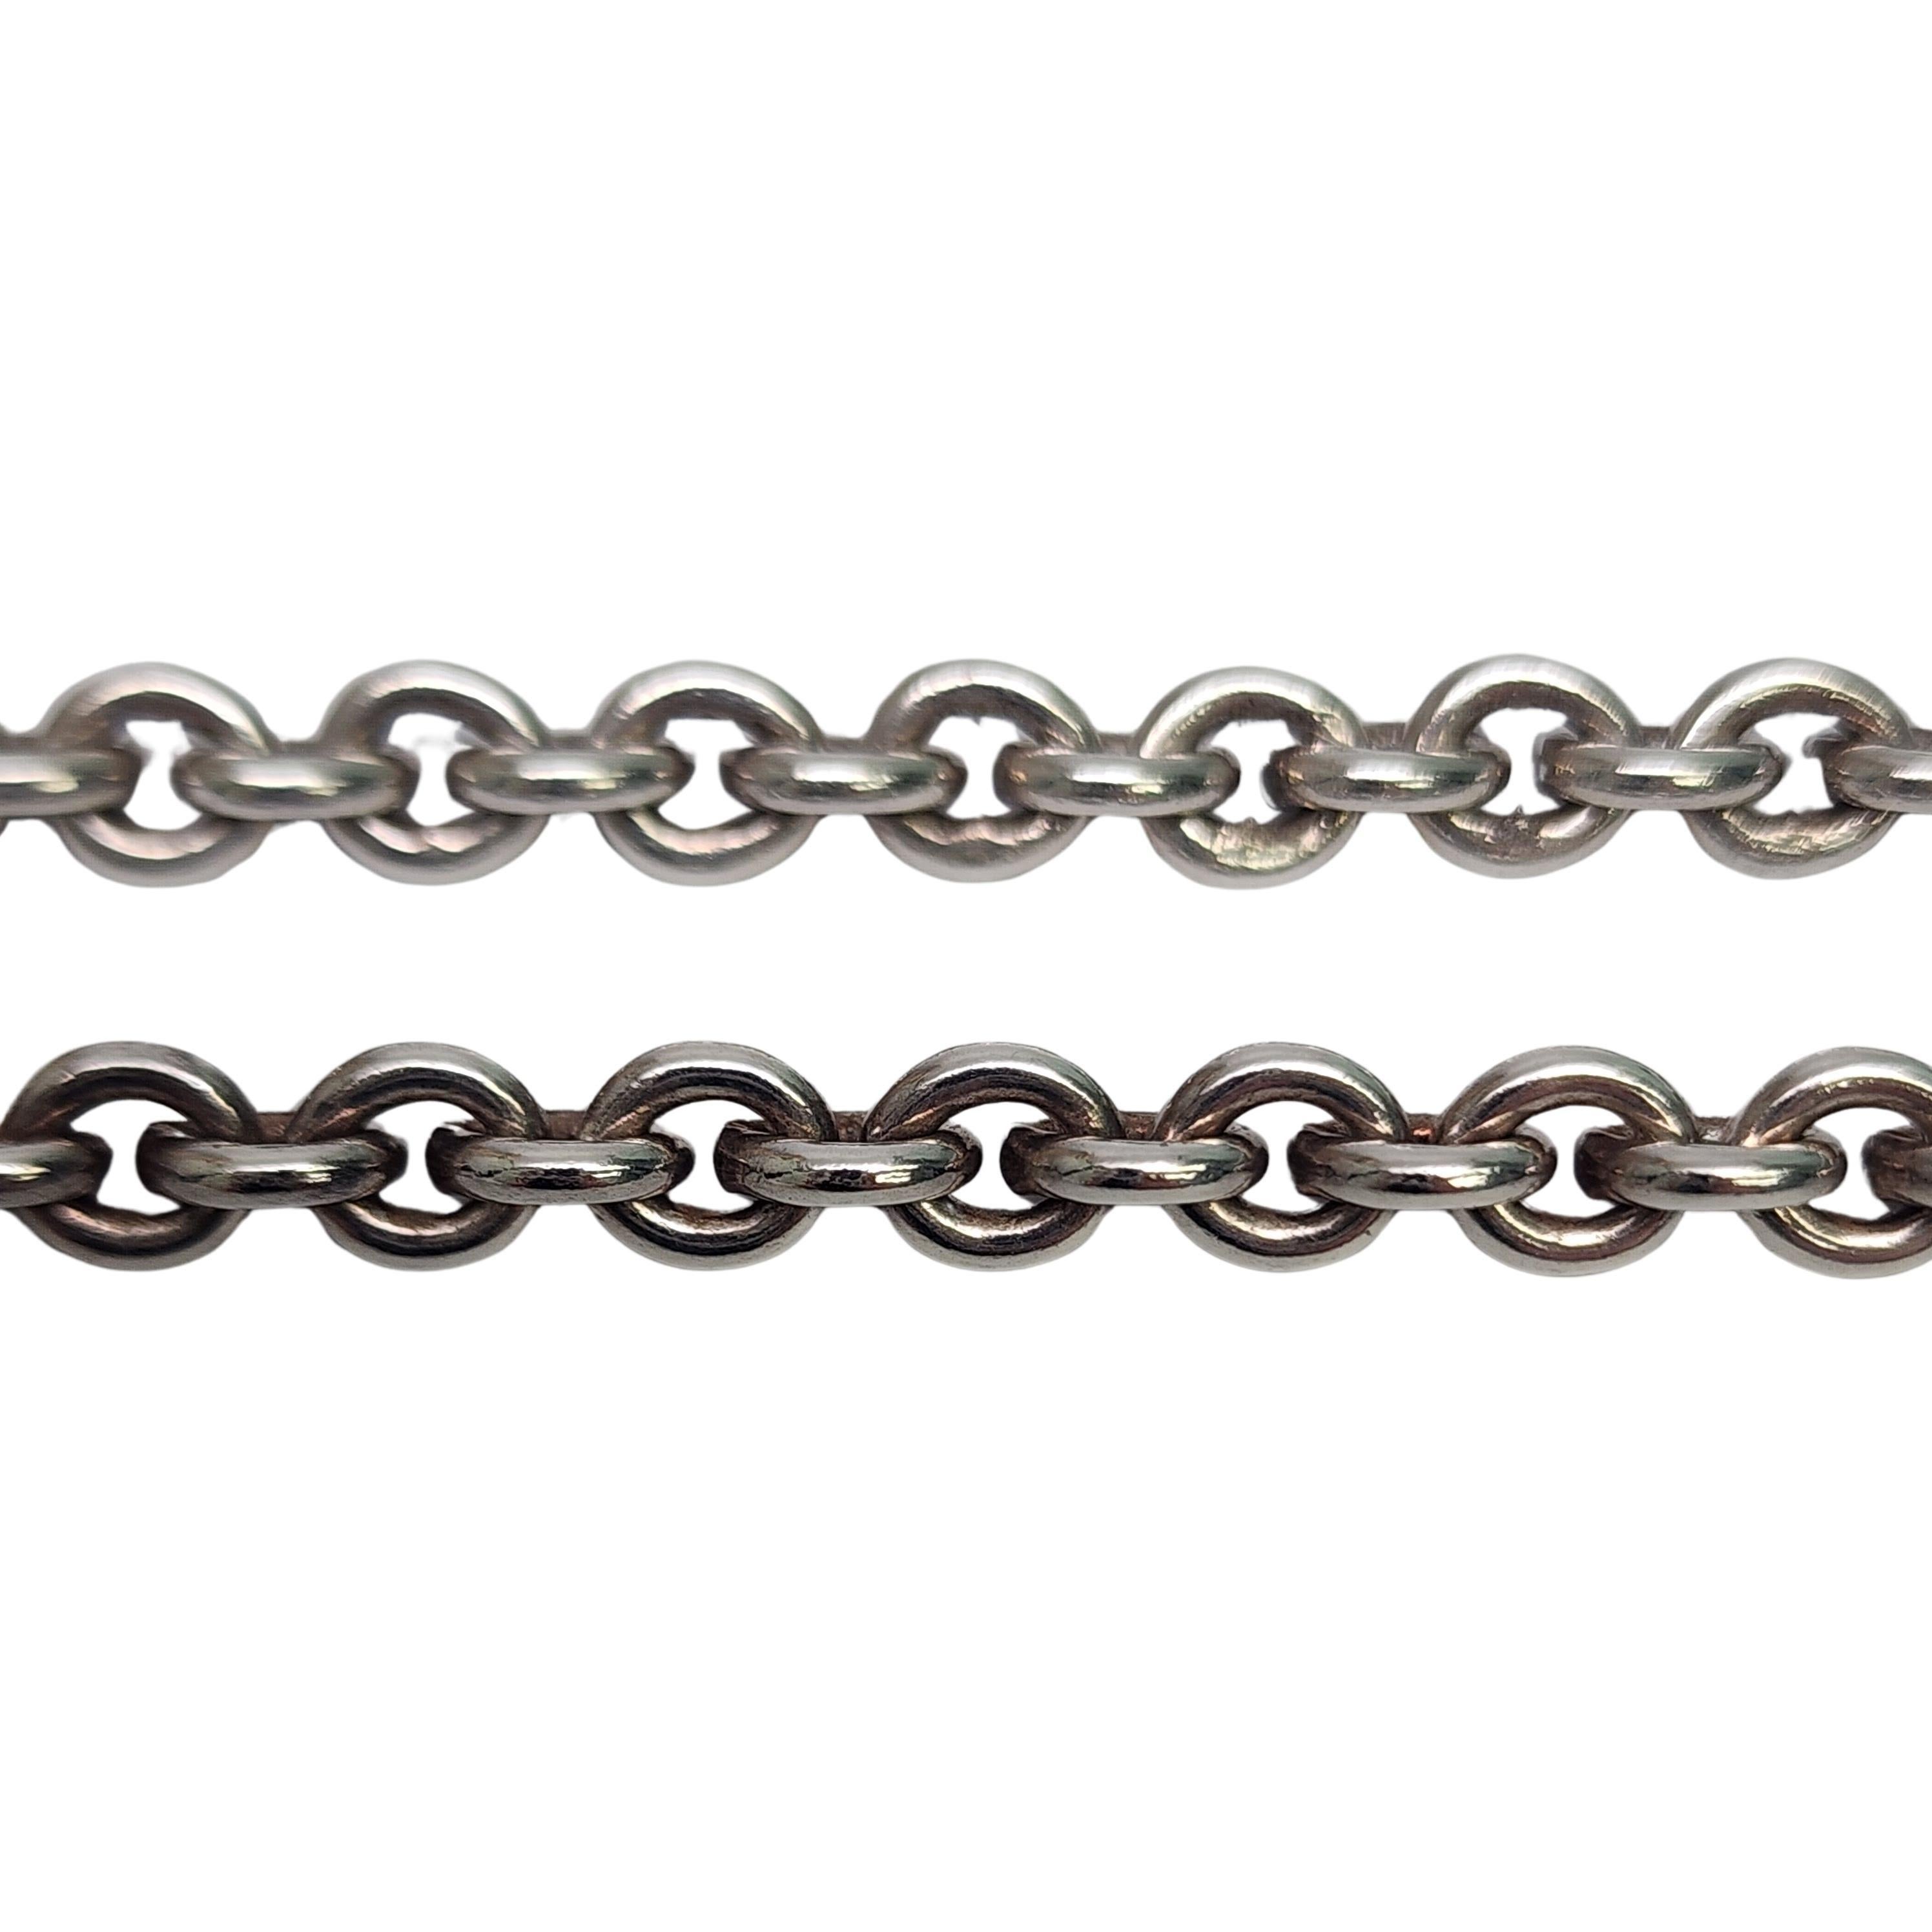 Sterling silver round link chain necklace and bracelet set.

A necklace and bracelet set in matching simple and classic small round links in sterling silver.

Weighs approx 40.9g, 26.3dwt total

Necklace measures approx 18